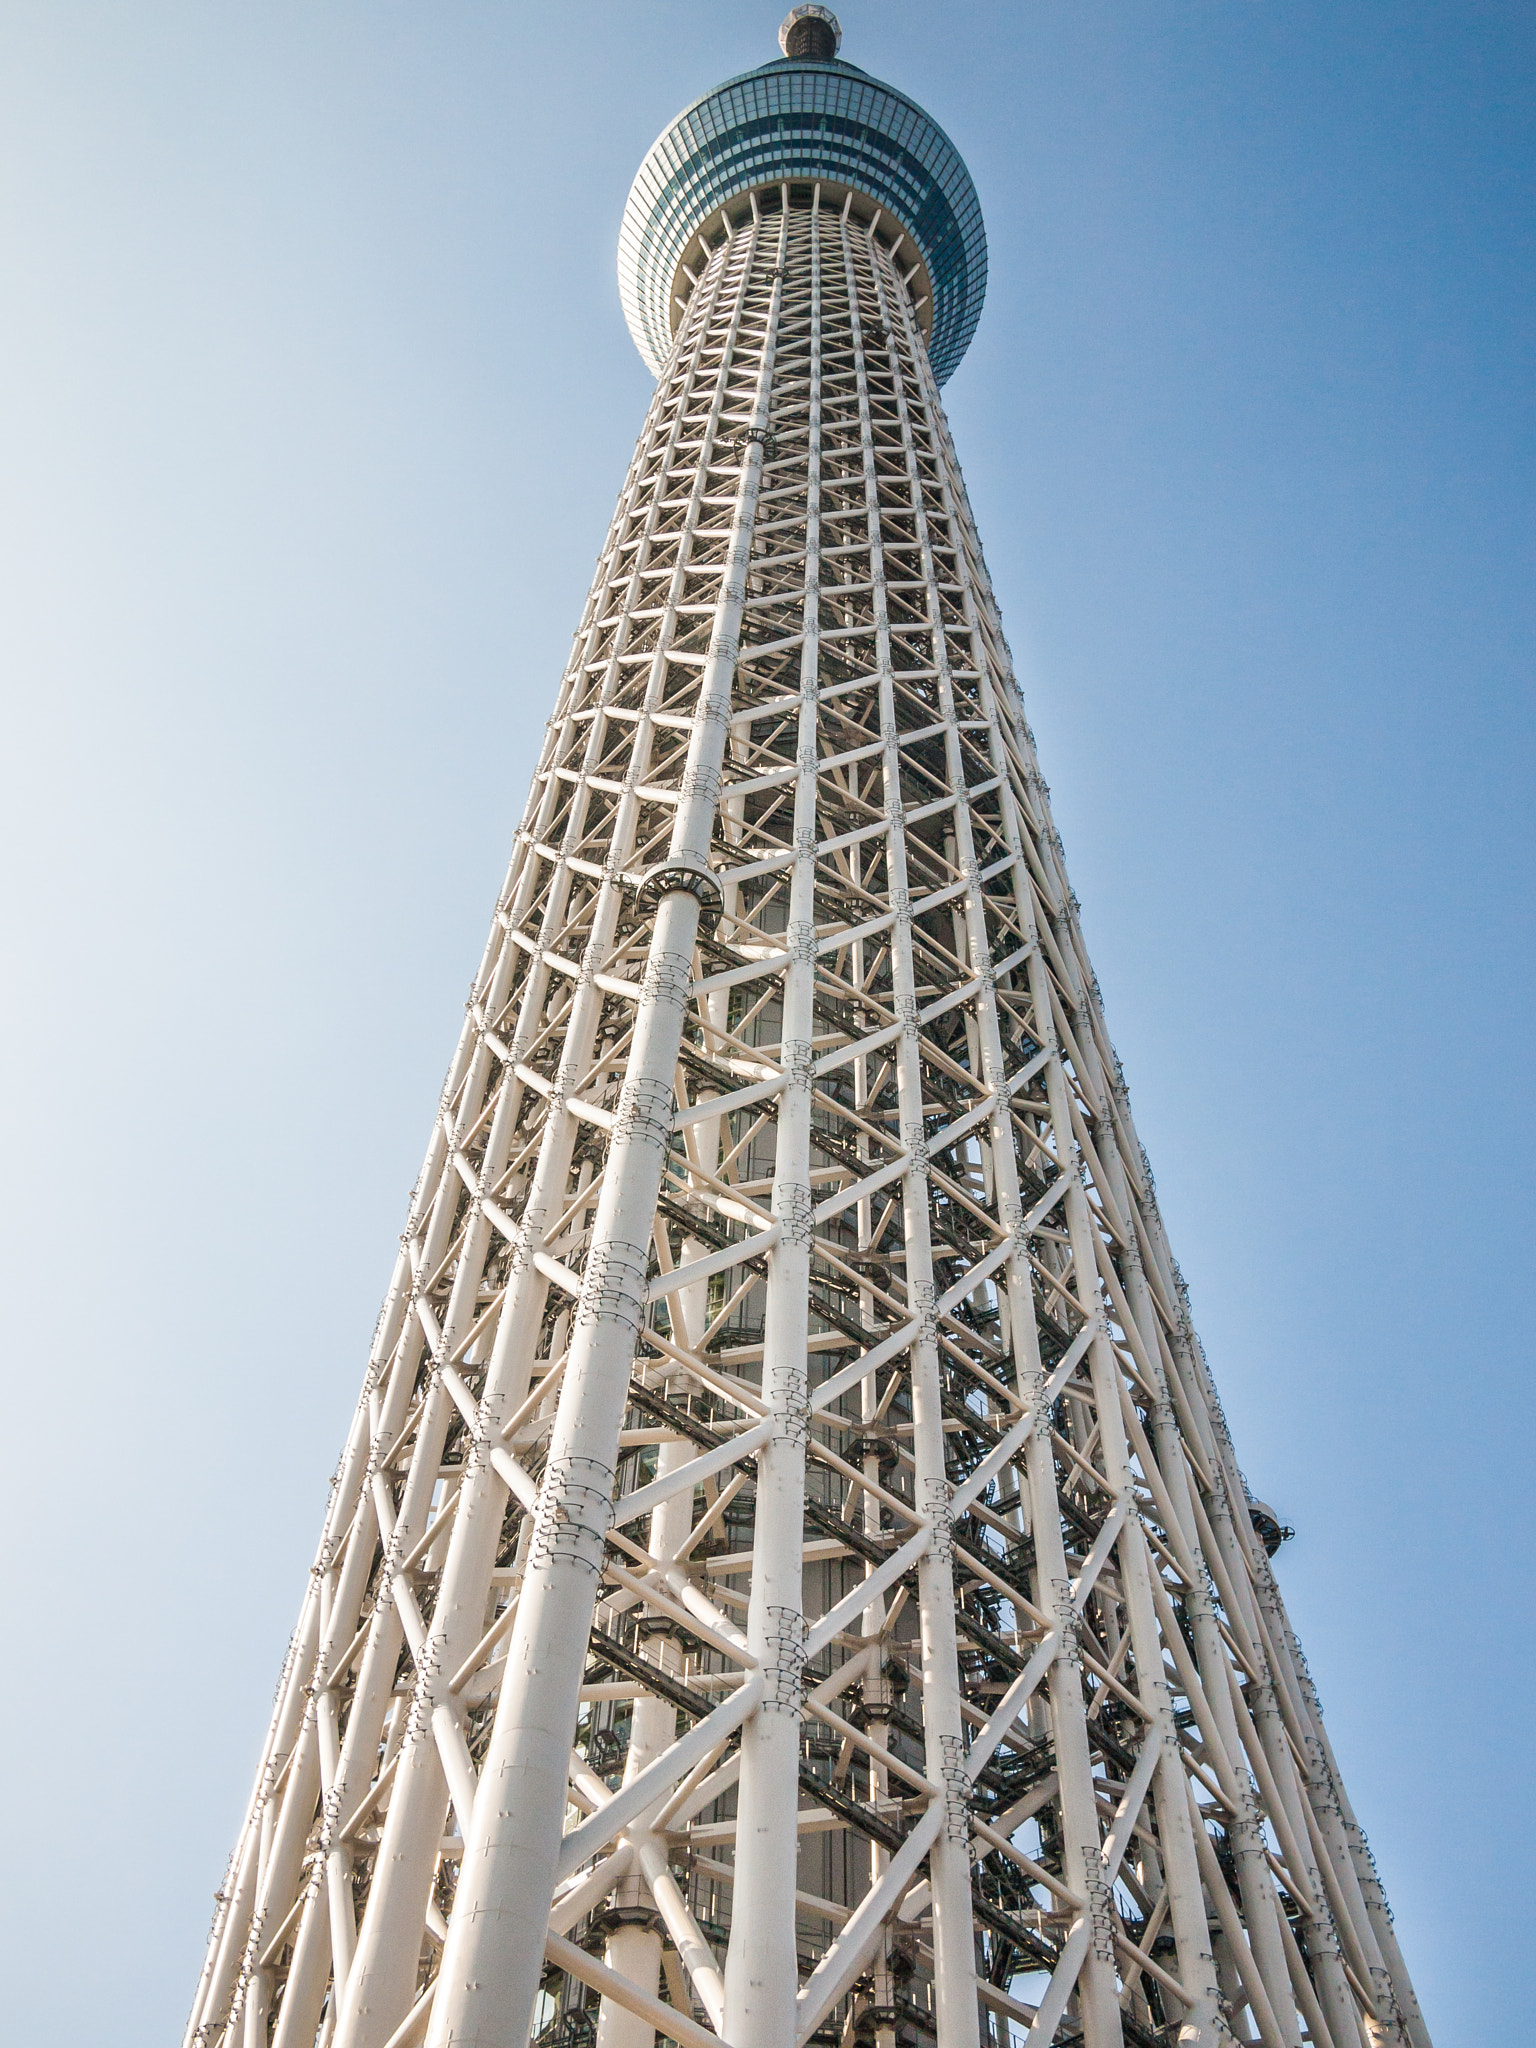 Olympus PEN E-P1 + Panasonic Lumix G 20mm F1.7 ASPH sample photo. Below view of the tokyo skytree photography